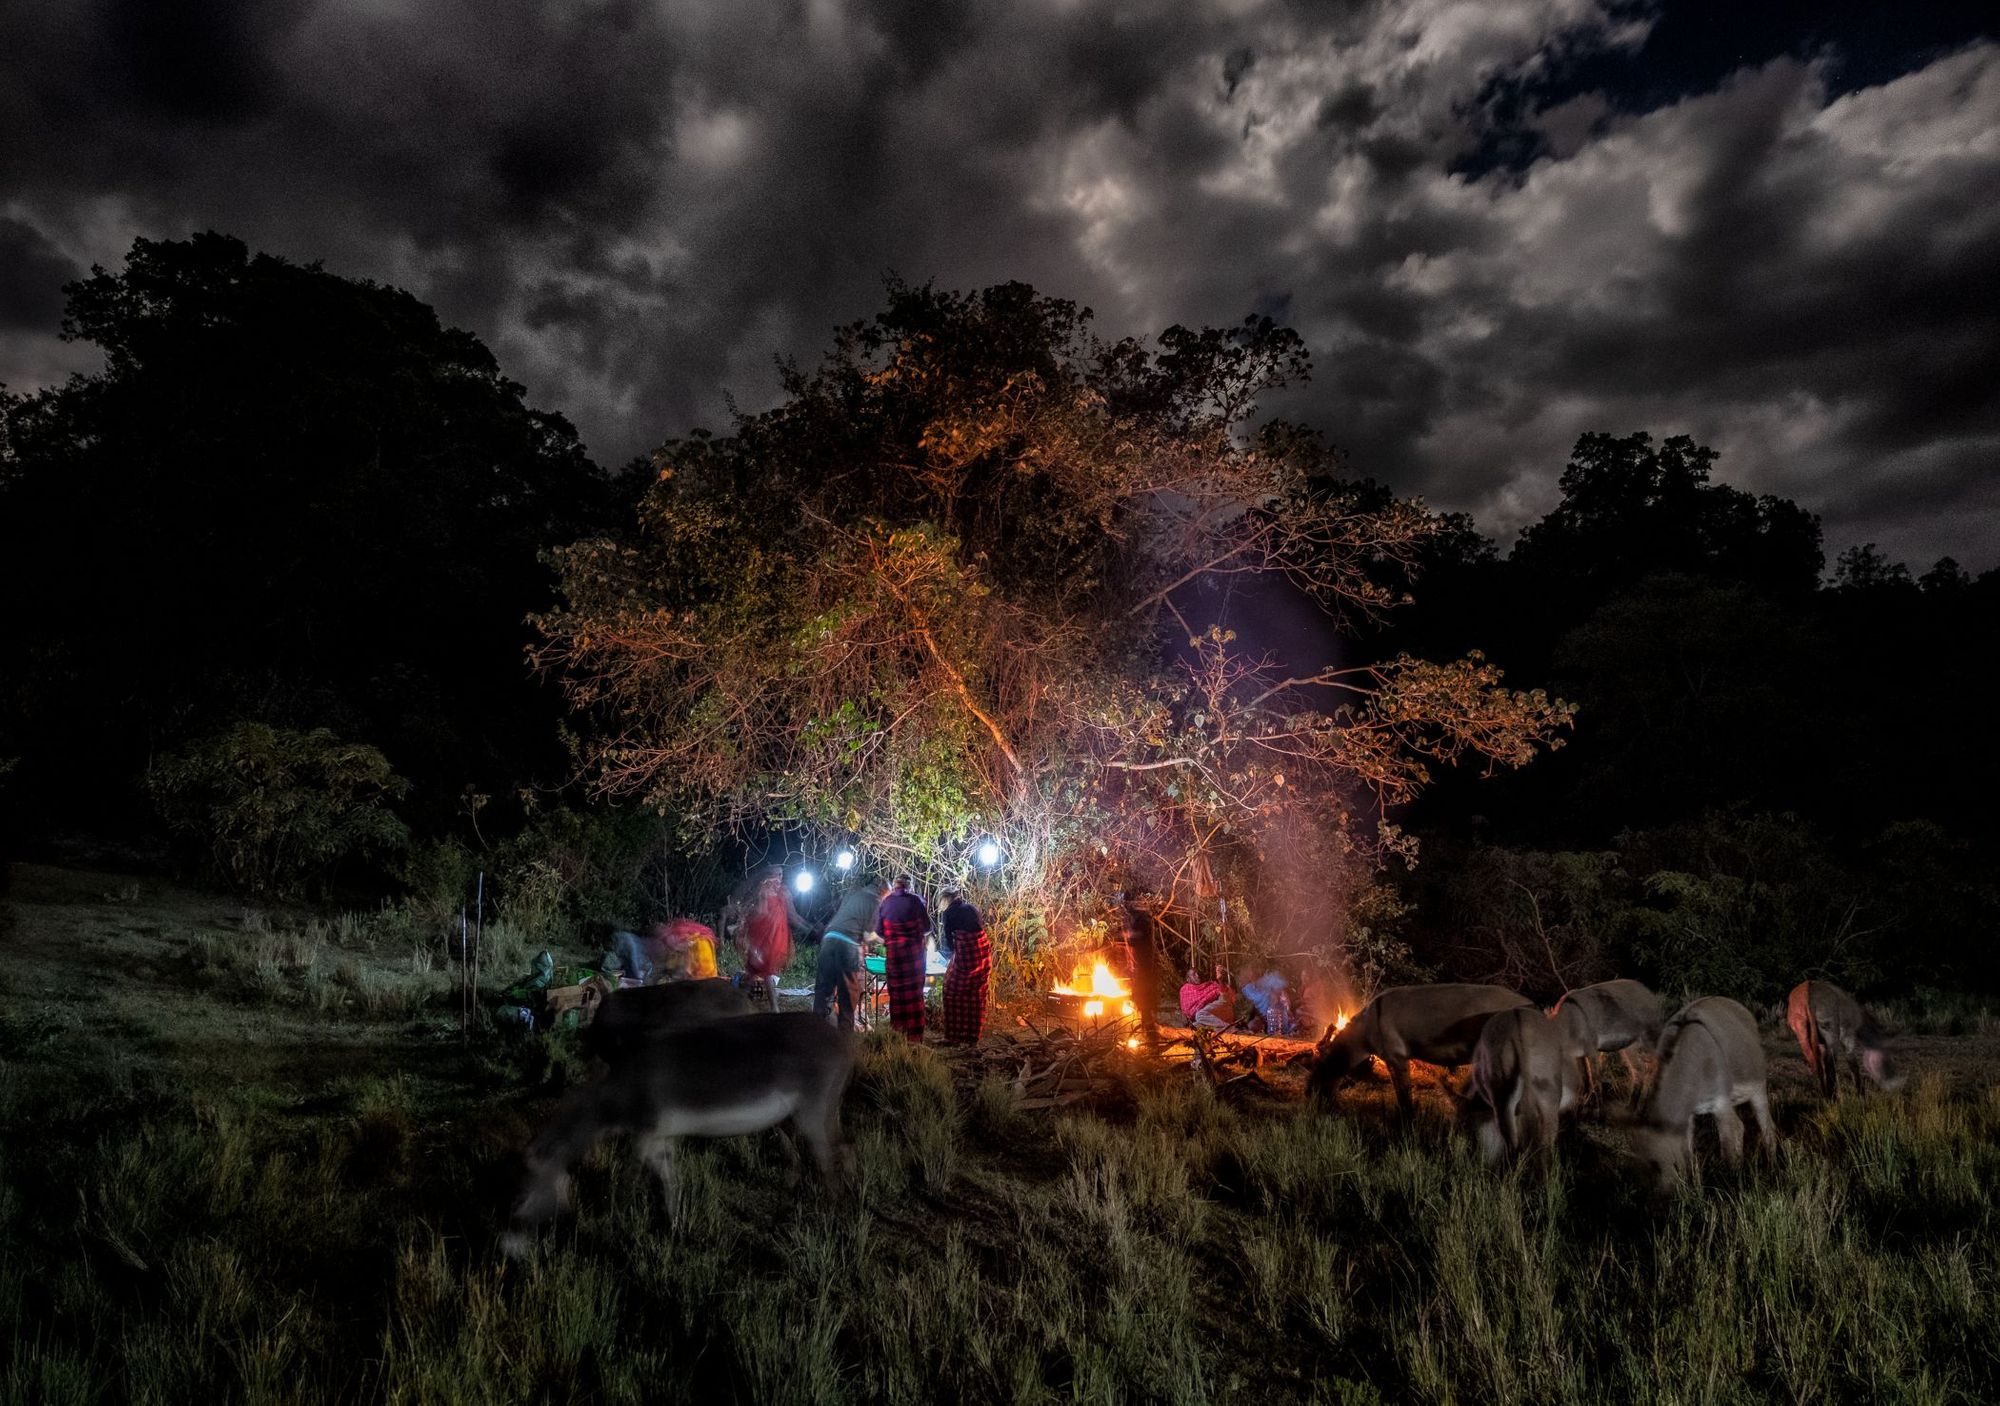 Night around the campfire in the Loita Hills, where stories are told as the darkness descends. Photo: Much Better Adventures